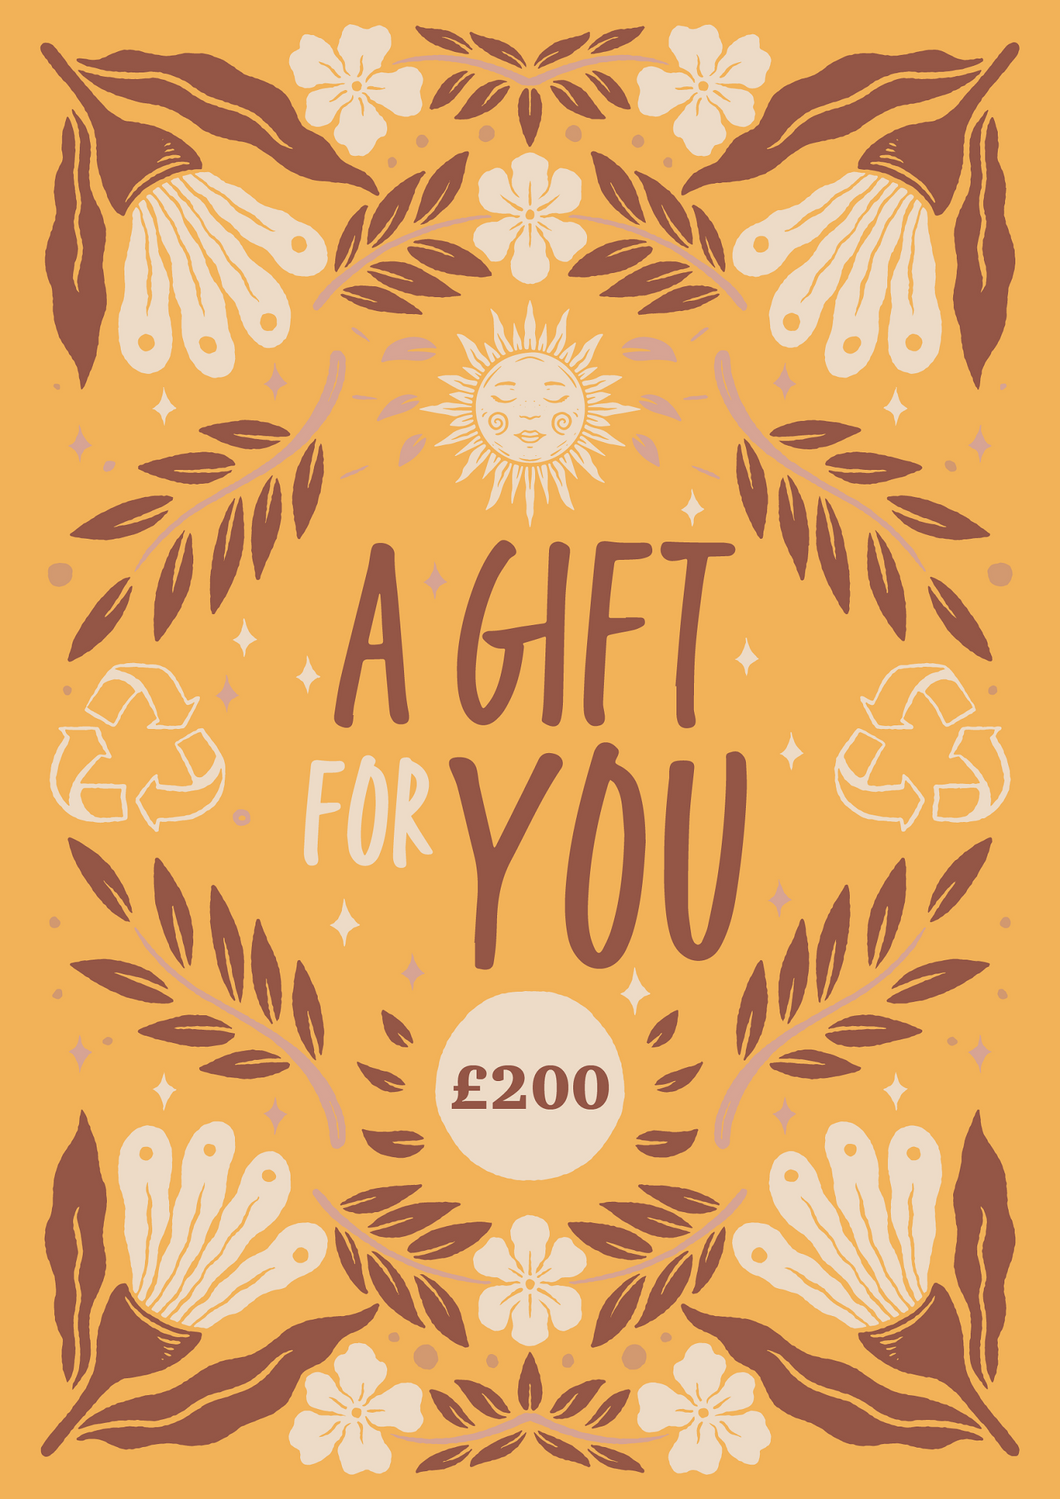 A gift for you £200